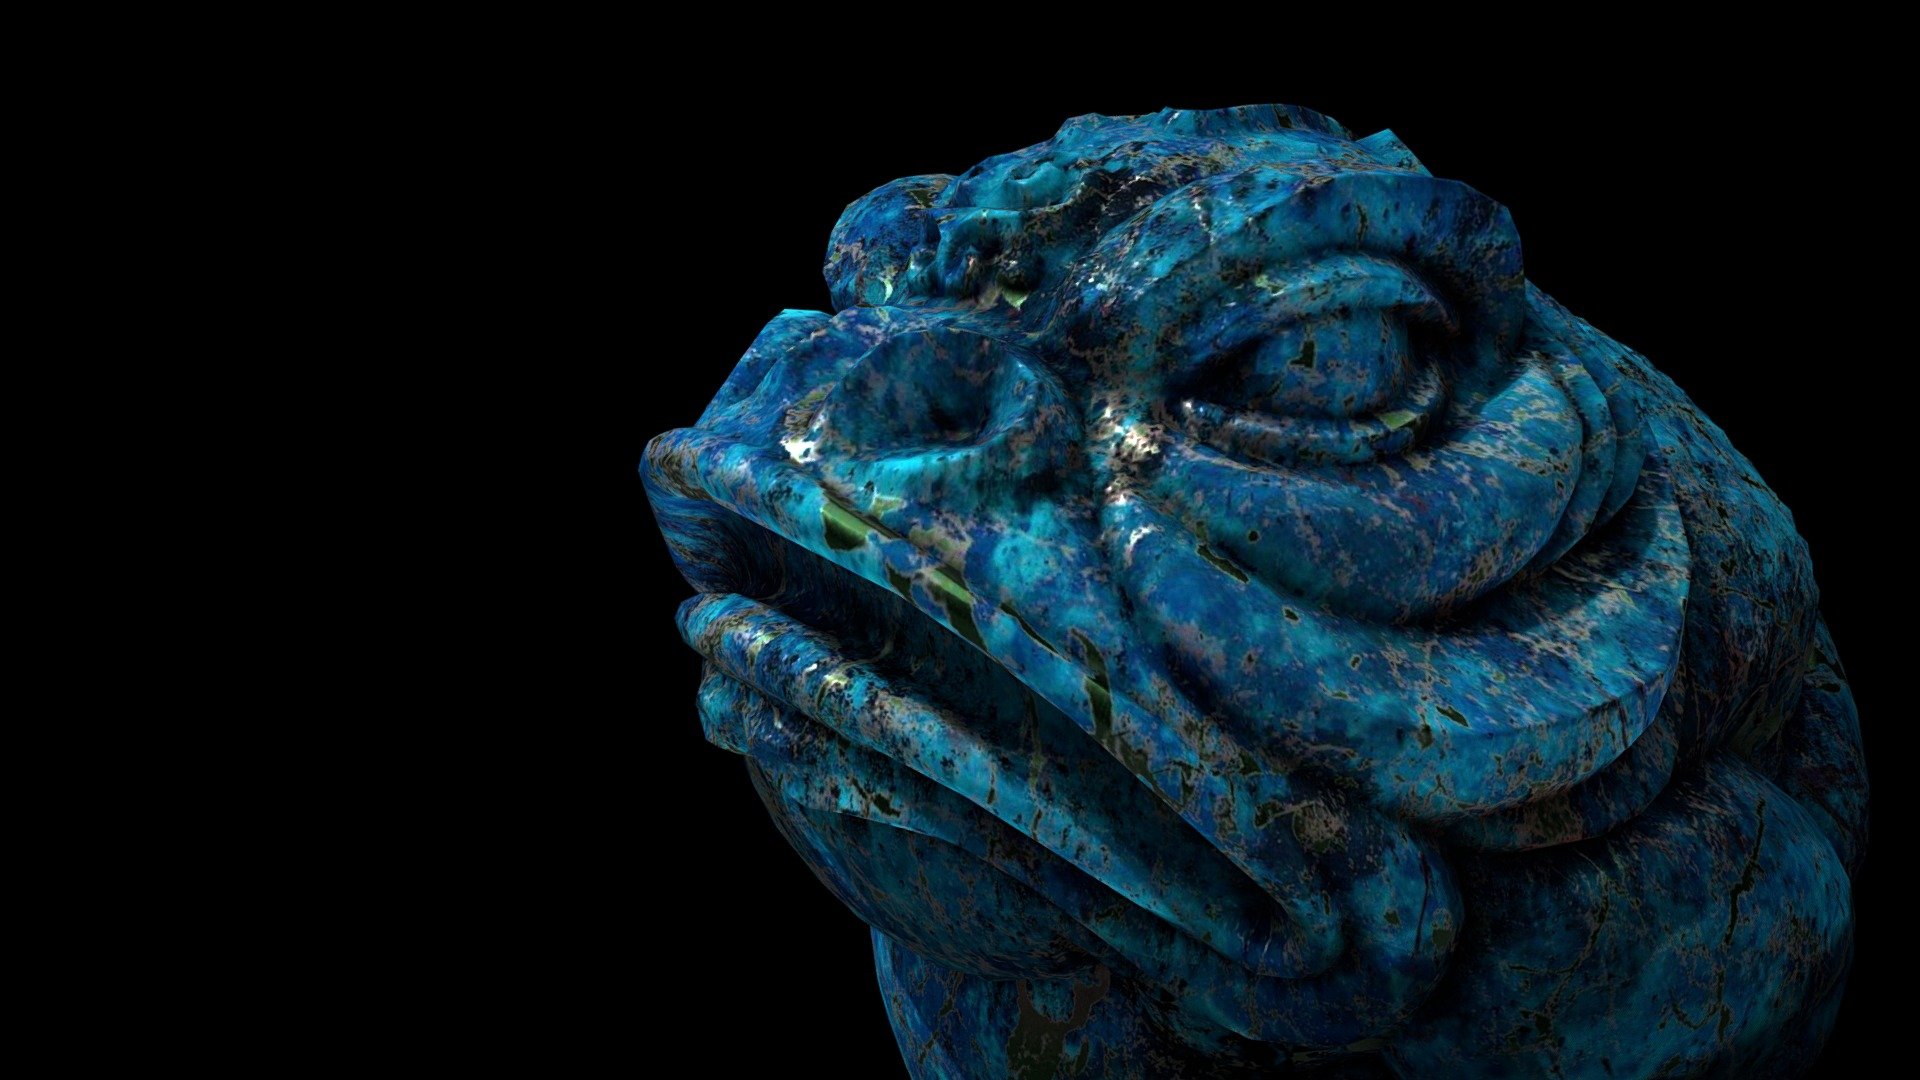 The blue toad

Material designed in Substance Painter on the sample asset &ldquo;JadeToad